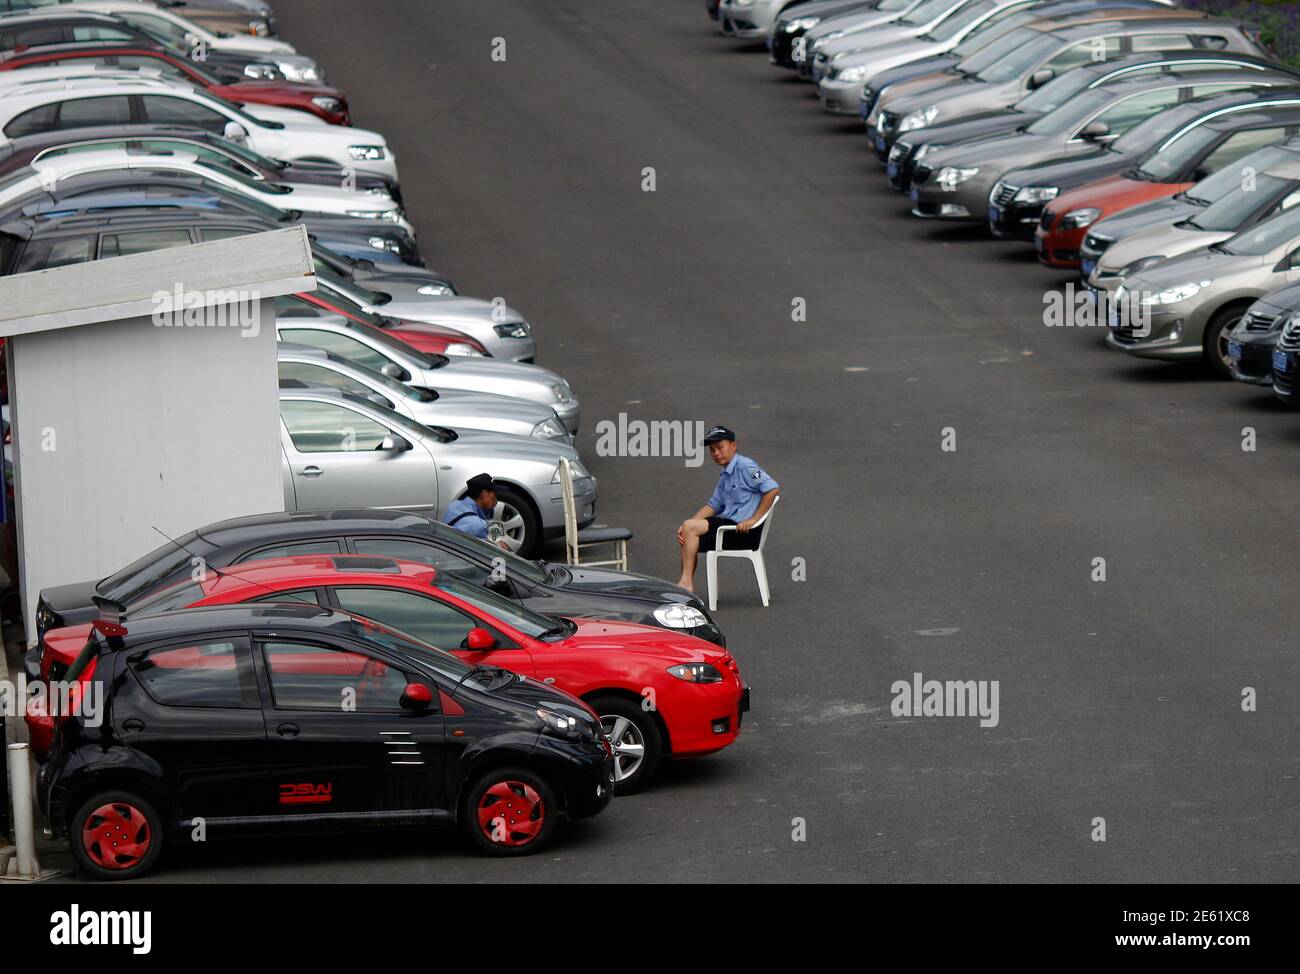 A parking lot guard sits on a chair in a downtown area of Shanghai June 5, 2012. While the opportunities are vast in China's estimated $50 billion auto insurance industry, there are roadblocks aplenty - from poor driving standards to a new generation of car owners unfamiliar with the concept of buying protection against accidents and repairs. In 2010, China reported 3.9 million road accidents that killed 65,225 people and injured 254,075. For comparison, there were 30,797 fatal crashes in the United States in 2009, according to the National Highway Traffic Safety Administration, which has almo Stock Photo